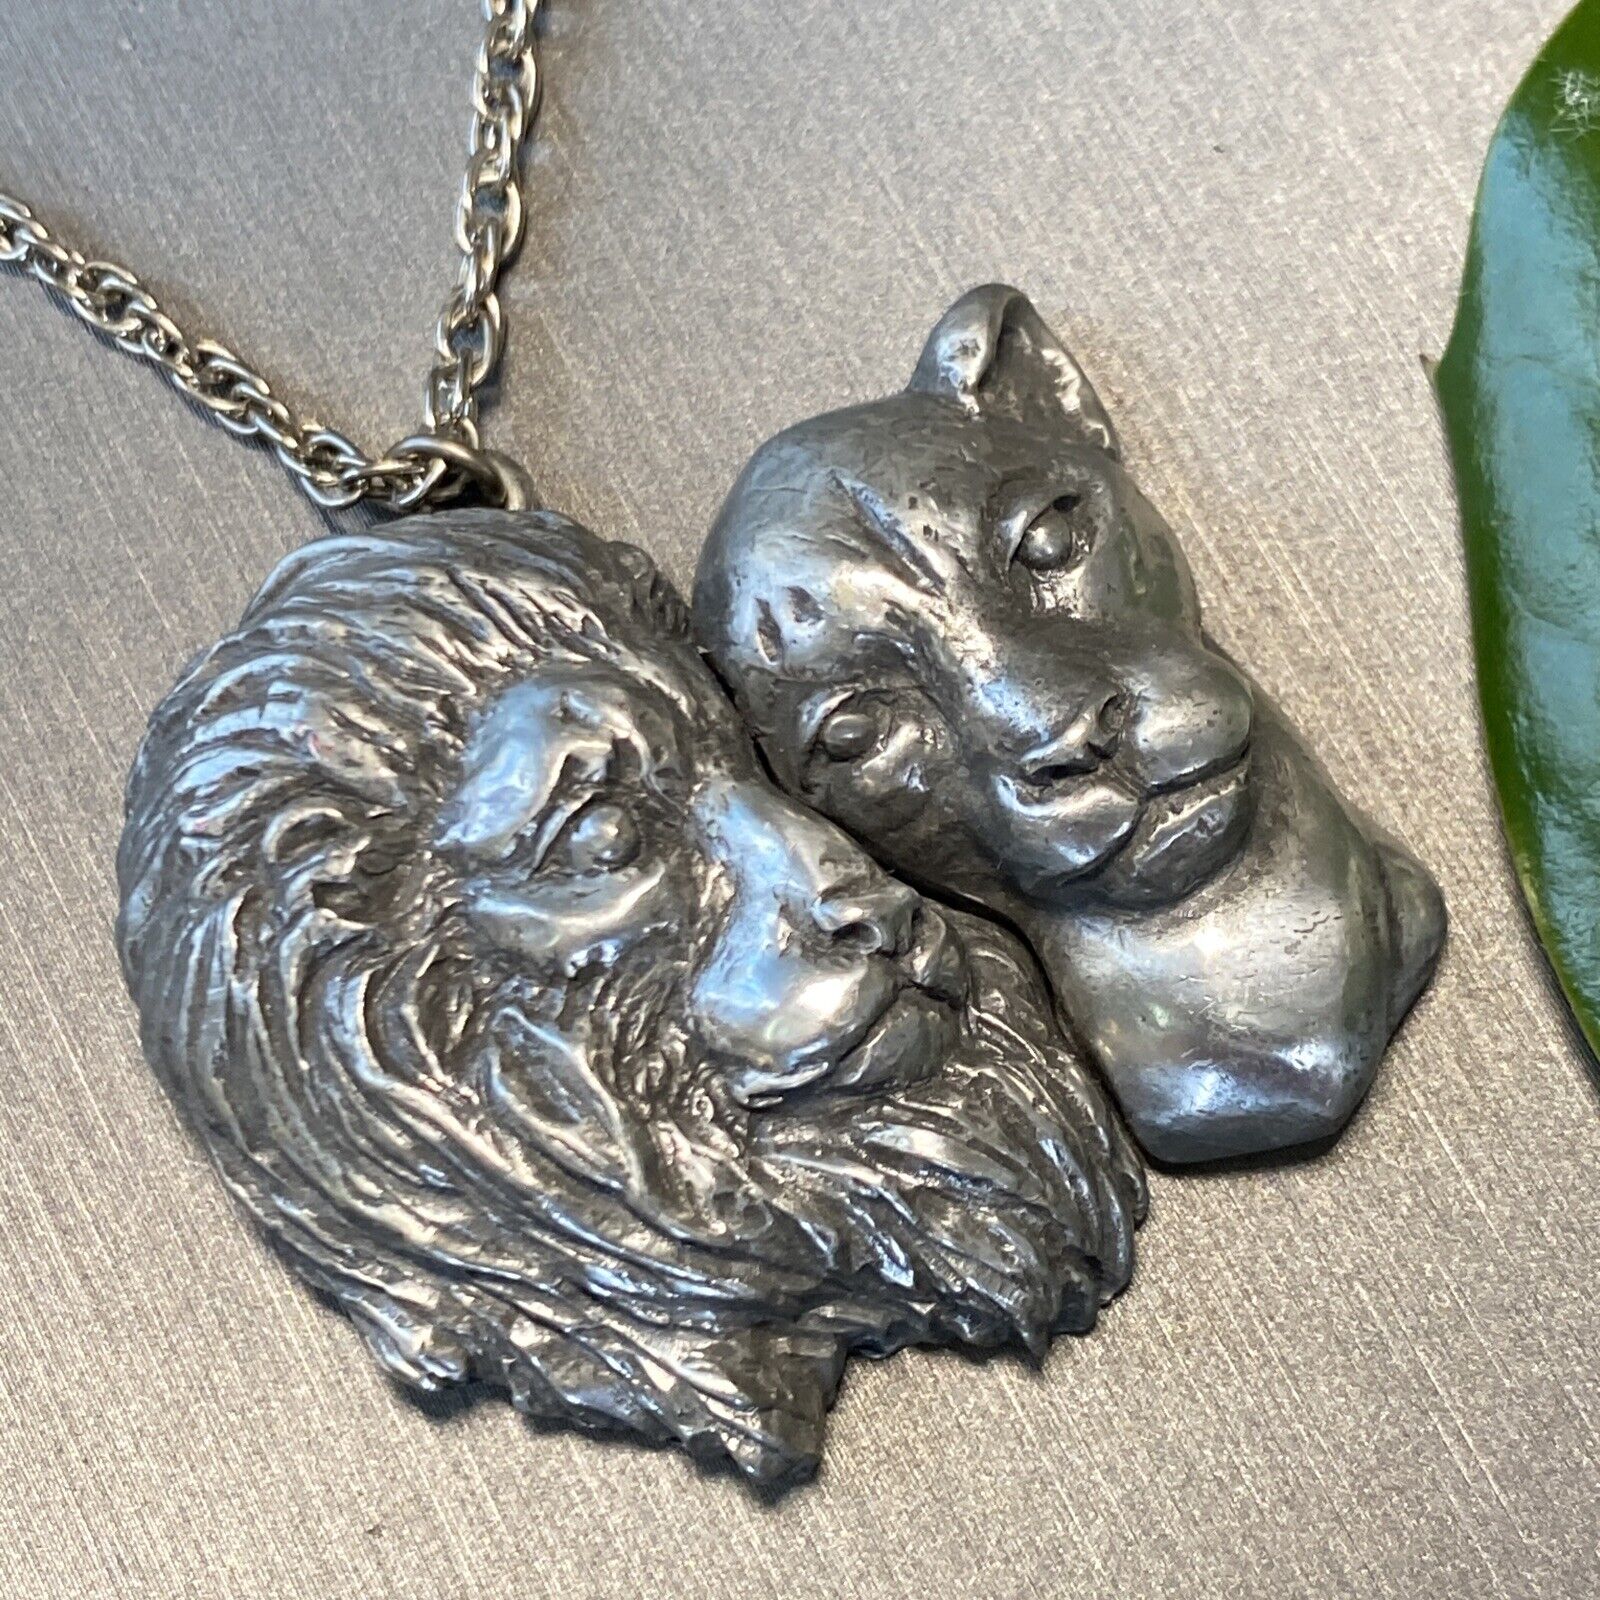 Sculpted Lion Couple Family Signed JPD Pewter Pendant Vintage Chain Necklace 1.7